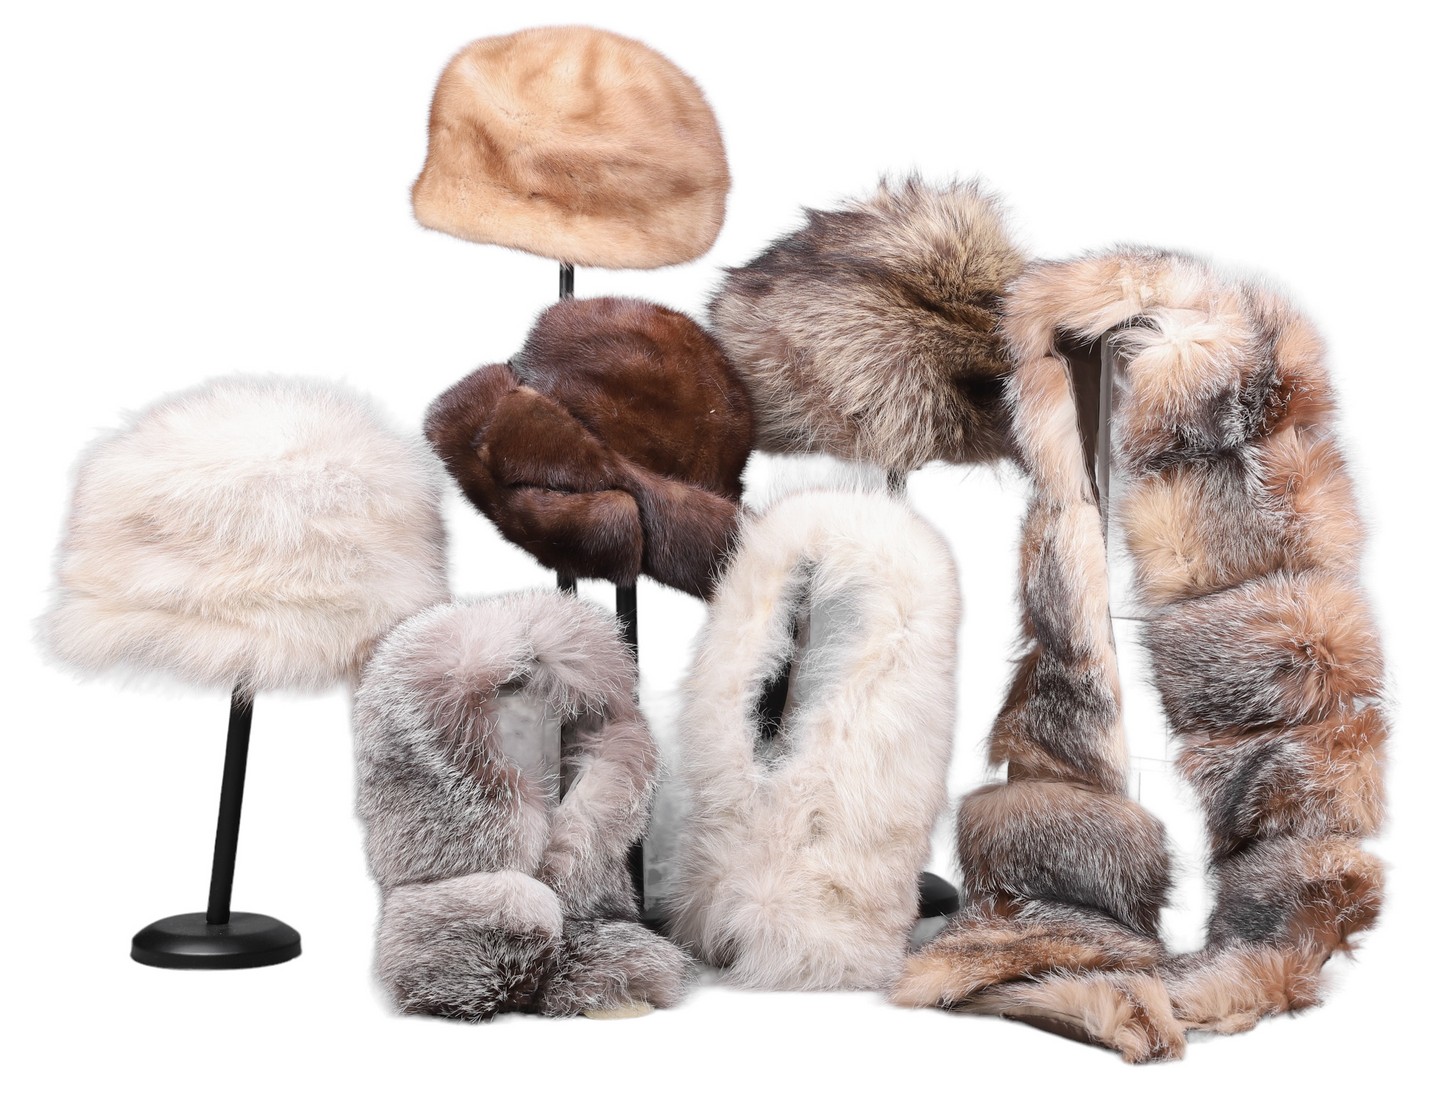  7 Vintage fur hats and collars 27a6a5